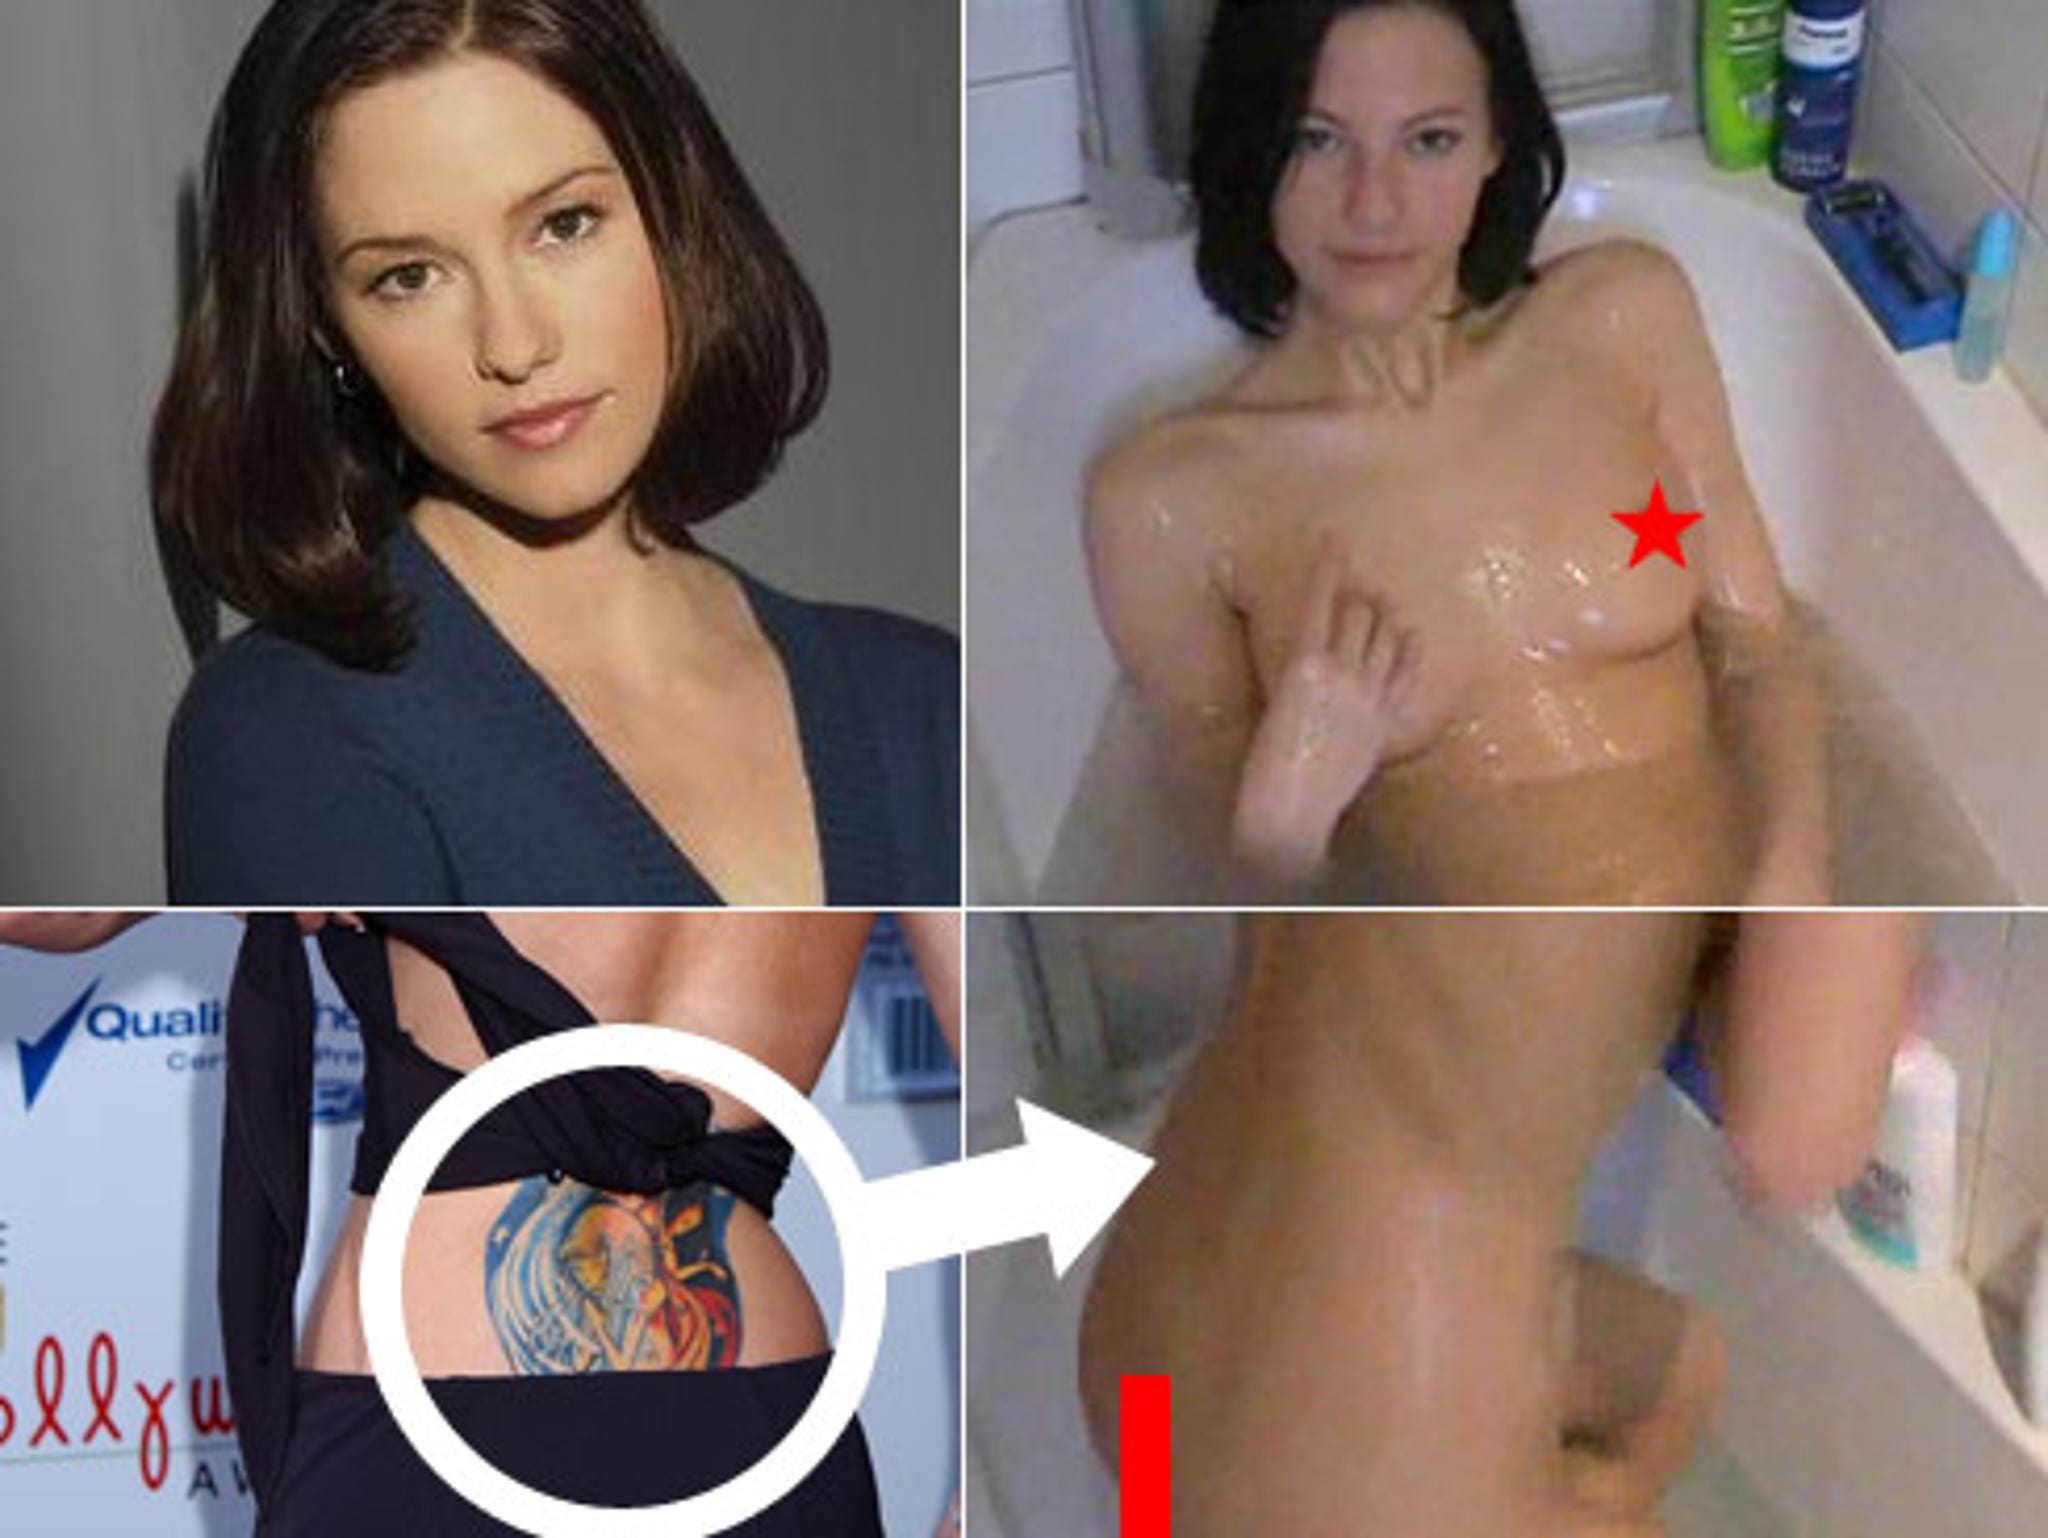 colleen faulkner recommends chyler leigh tits pic